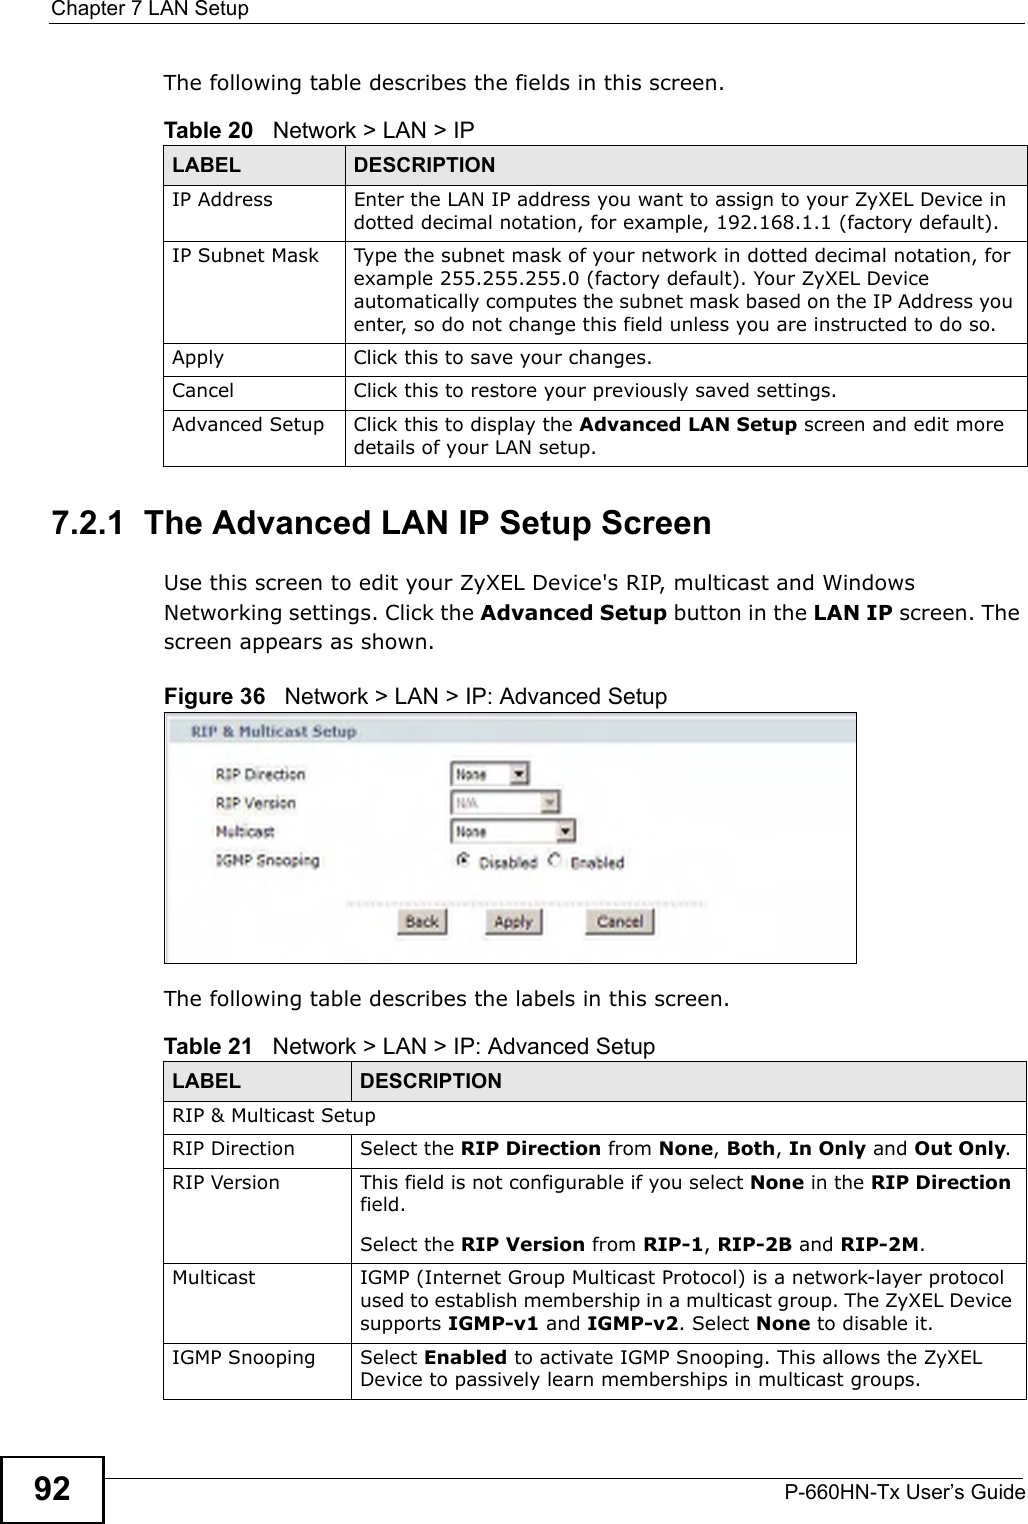 Chapter 7 LAN SetupP-660HN-Tx User’s Guide92The following table describes the fields in this screen.  7.2.1  The Advanced LAN IP Setup Screen Use this screen to edit your ZyXEL Device&apos;s RIP, multicast and Windows Networking settings. Click the Advanced Setup button in the LAN IP screen. The screen appears as shown.Figure 36   Network &gt; LAN &gt; IP: Advanced SetupThe following table describes the labels in this screen.  Table 20   Network &gt; LAN &gt; IPLABEL DESCRIPTIONIP Address Enter the LAN IP address you want to assign to your ZyXEL Device in dotted decimal notation, for example, 192.168.1.1 (factory default). IP Subnet Mask  Type the subnet mask of your network in dotted decimal notation, for example 255.255.255.0 (factory default). Your ZyXEL Device automatically computes the subnet mask based on the IP Address you enter, so do not change this field unless you are instructed to do so.Apply Click this to save your changes.Cancel Click this to restore your previously saved settings.Advanced Setup Click this to display the Advanced LAN Setup screen and edit more details of your LAN setup.Table 21   Network &gt; LAN &gt; IP: Advanced SetupLABEL DESCRIPTIONRIP &amp; Multicast SetupRIP Direction Select the RIP Direction from None, Both, In Only and Out Only. RIP Version This field is not configurable if you select None in the RIP Direction field.Select the RIP Version from RIP-1, RIP-2B and RIP-2M.  Multicast IGMP (Internet Group Multicast Protocol) is a network-layer protocol used to establish membership in a multicast group. The ZyXEL Device supports IGMP-v1 and IGMP-v2. Select None to disable it.IGMP Snooping Select Enabled to activate IGMP Snooping. This allows the ZyXEL Device to passively learn memberships in multicast groups.